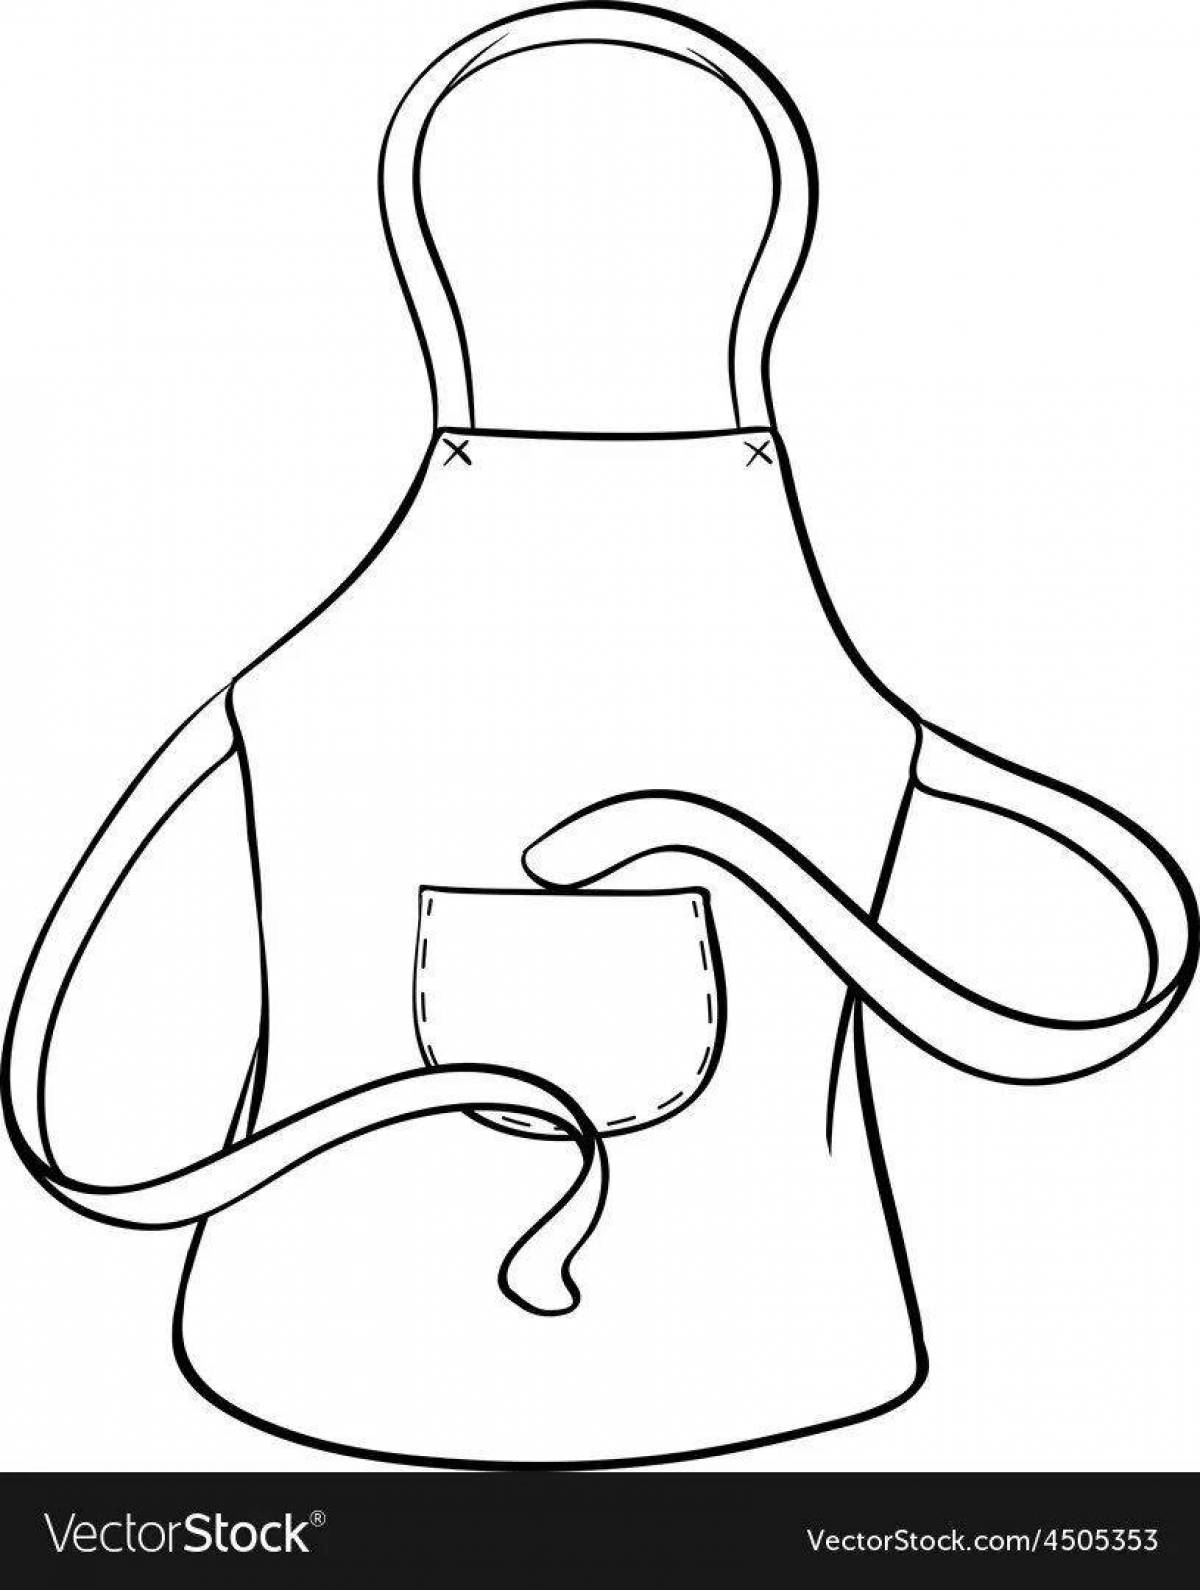 Colored apron coloring book for children